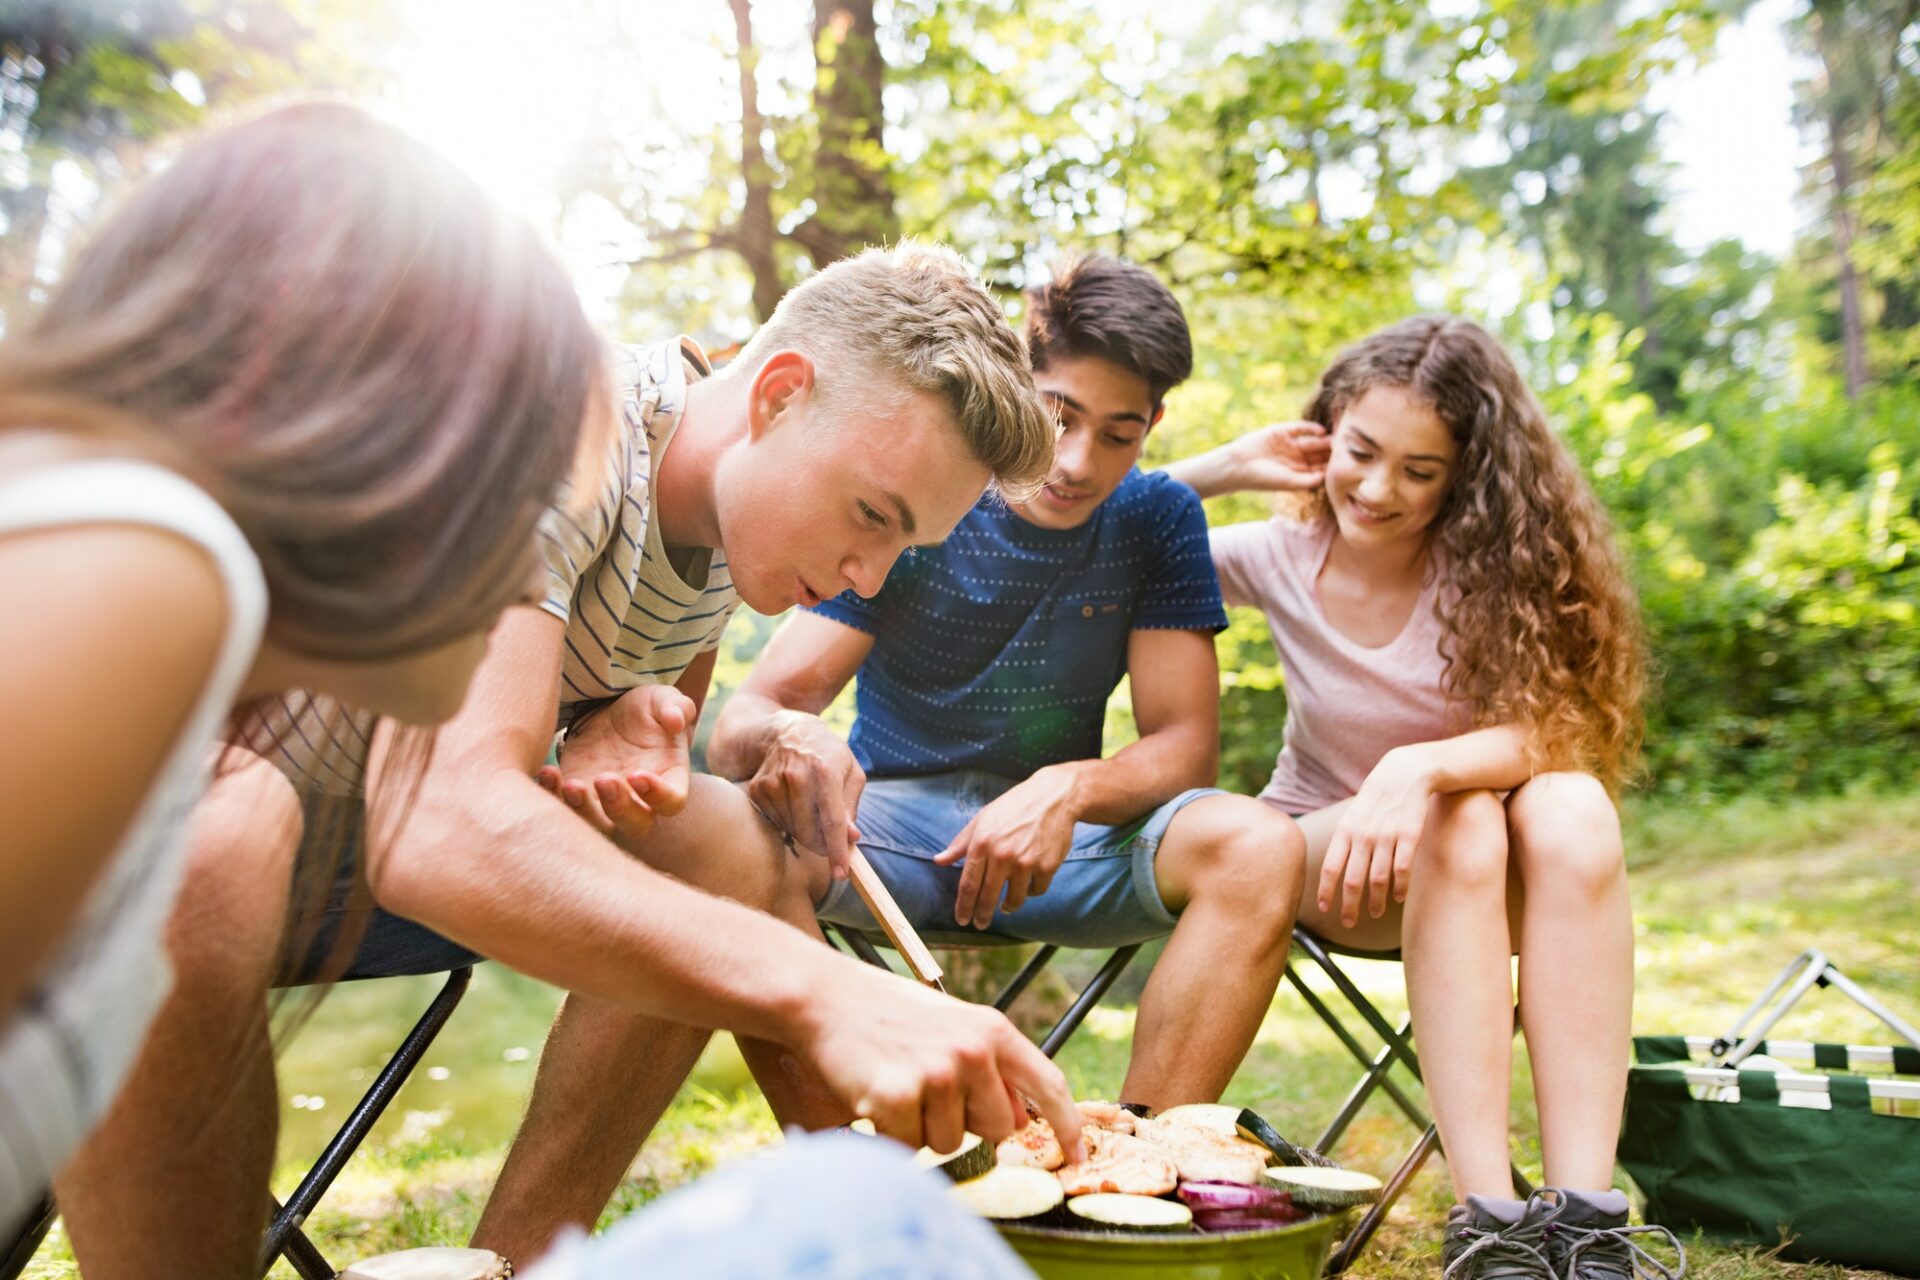 Teenagers camping, cooking vegetables on barbecue grill.